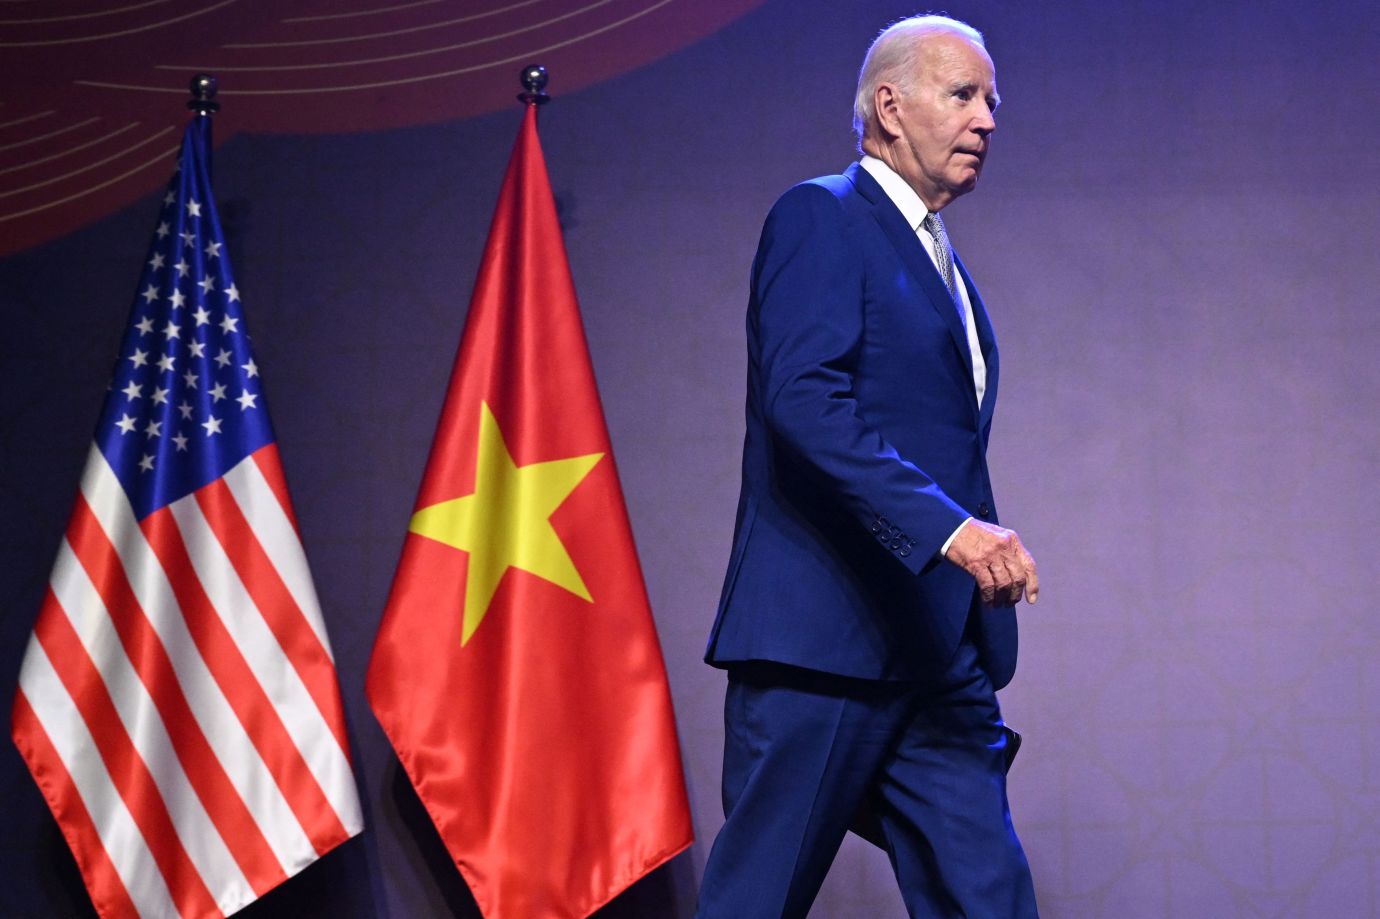 President Joe Biden arrives to hold a press conference in Hanoi on September 10, 2023, on the first day of a visit in Vietnam. (Photo by SAUL LOEB/AFP via Getty Images)